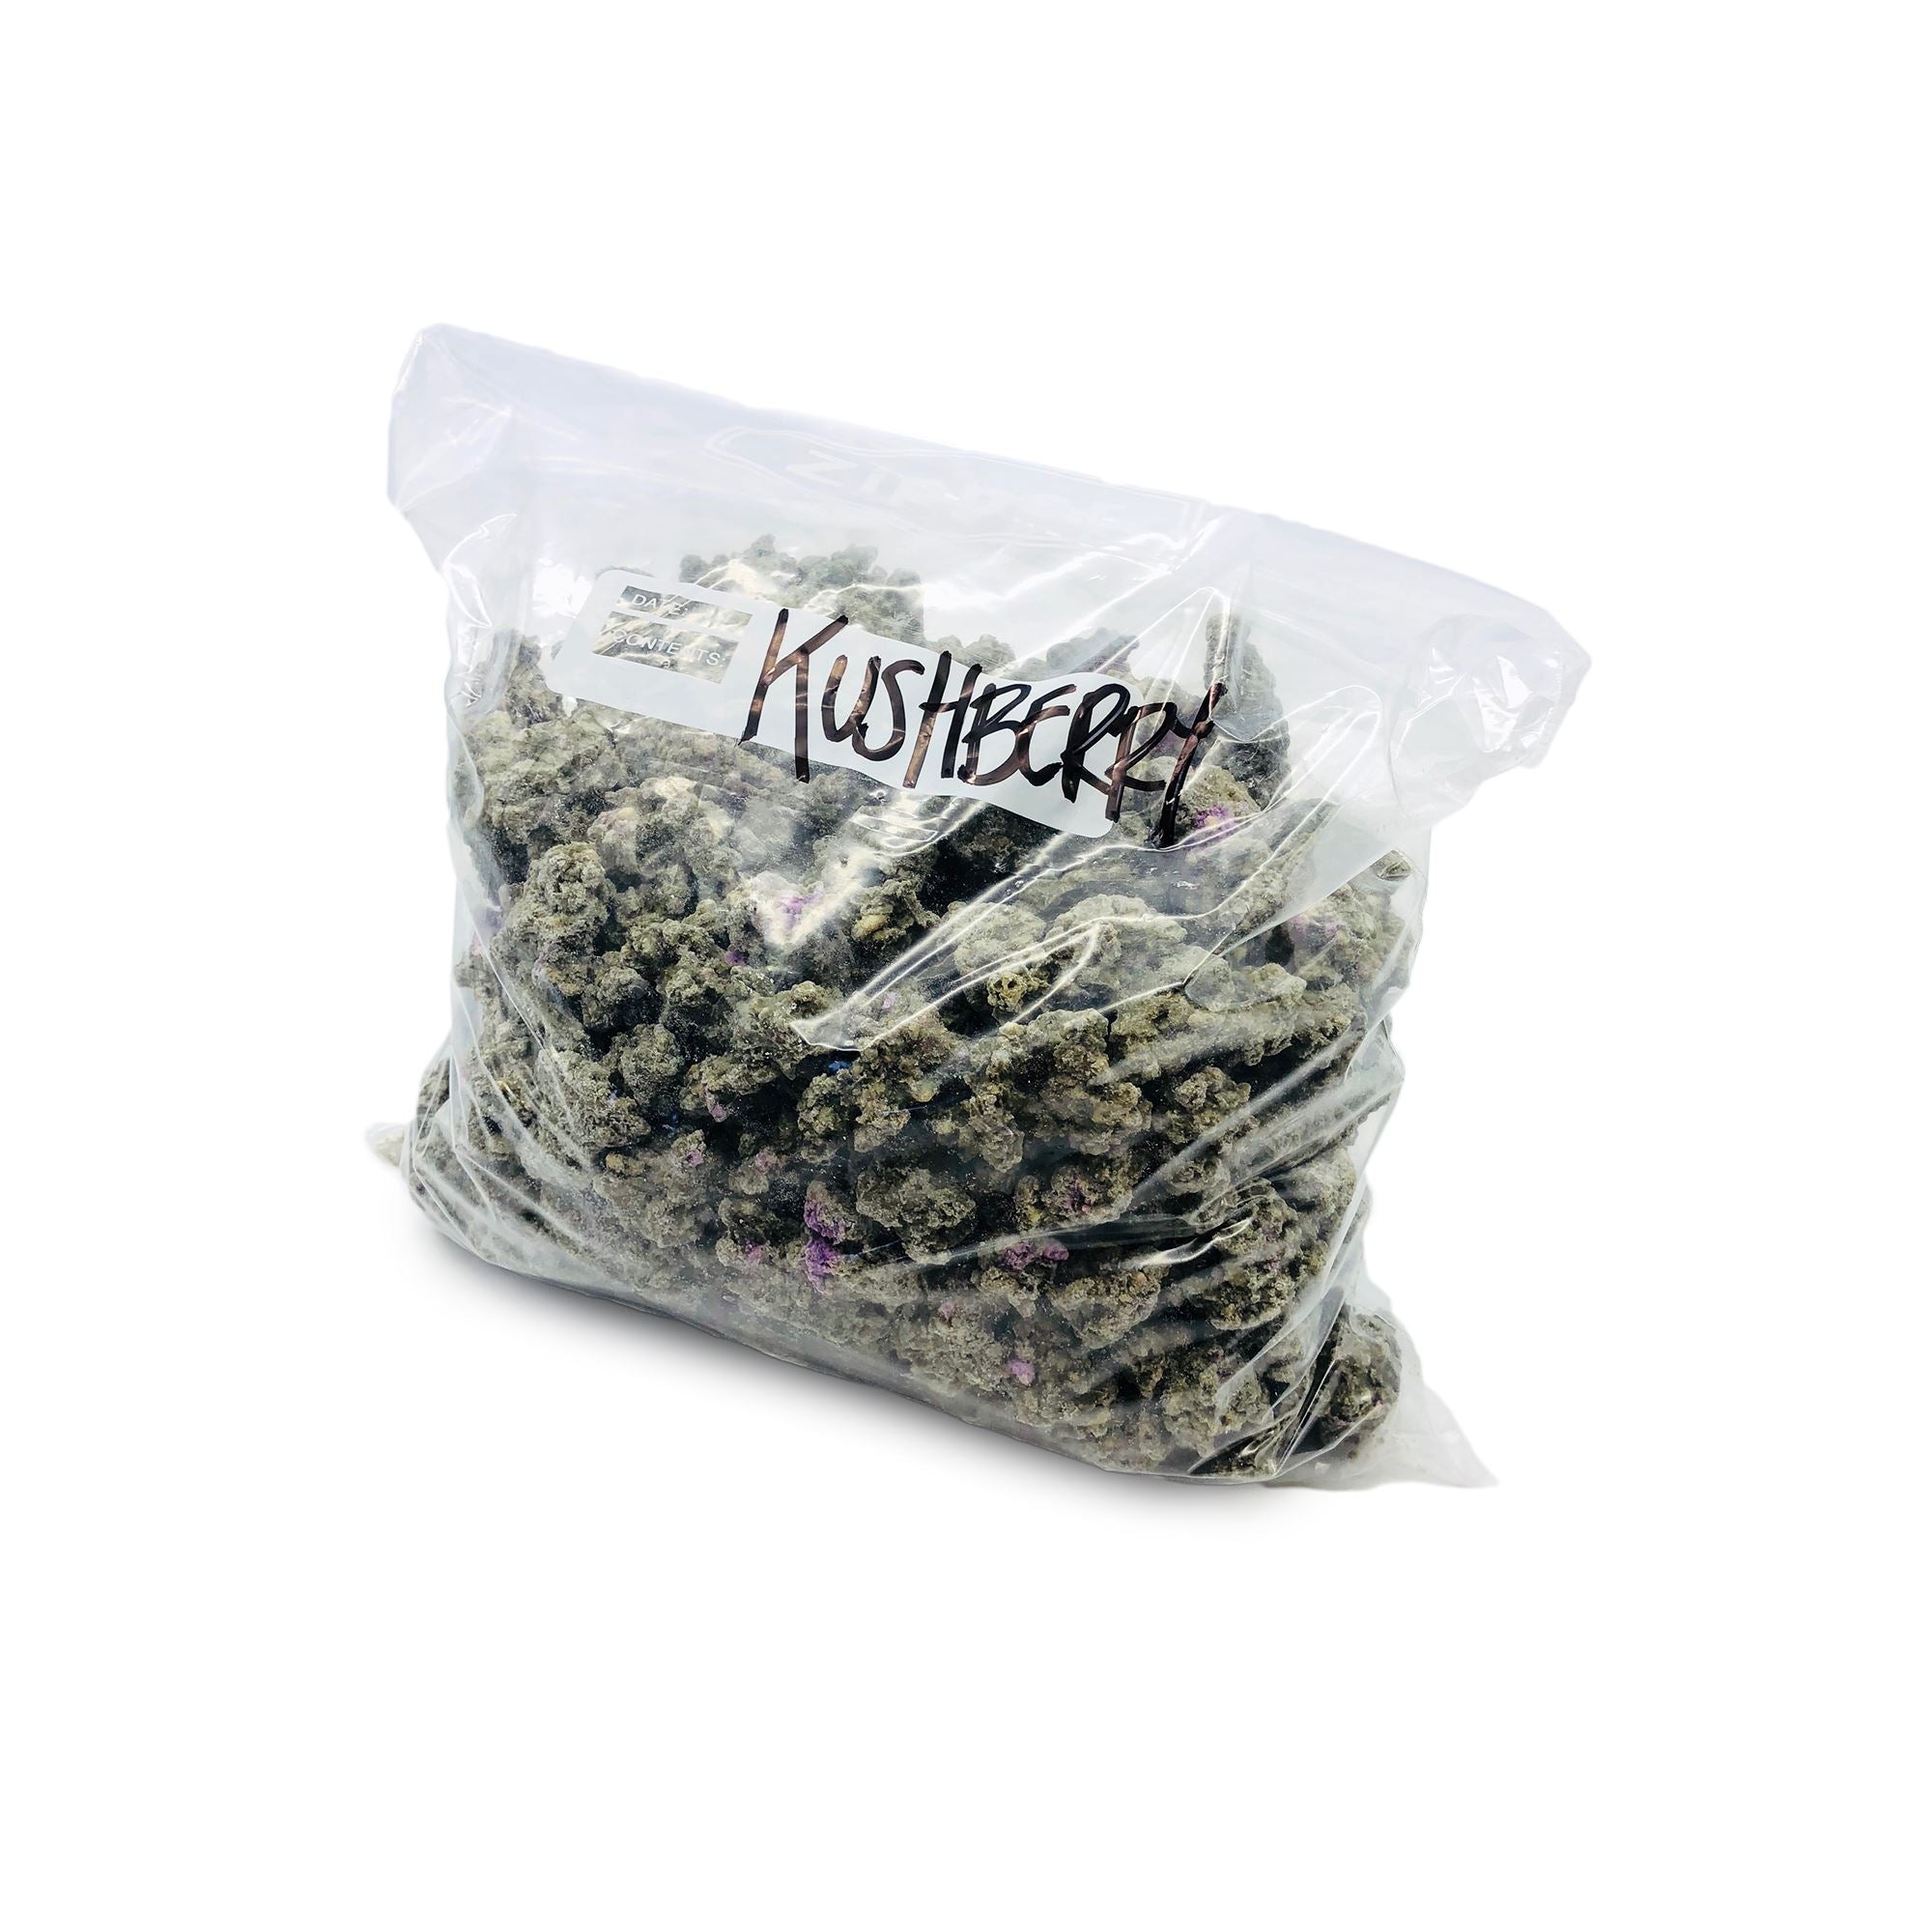 Kushberry Pound Baggie Pound baggie Calisweets LLC 